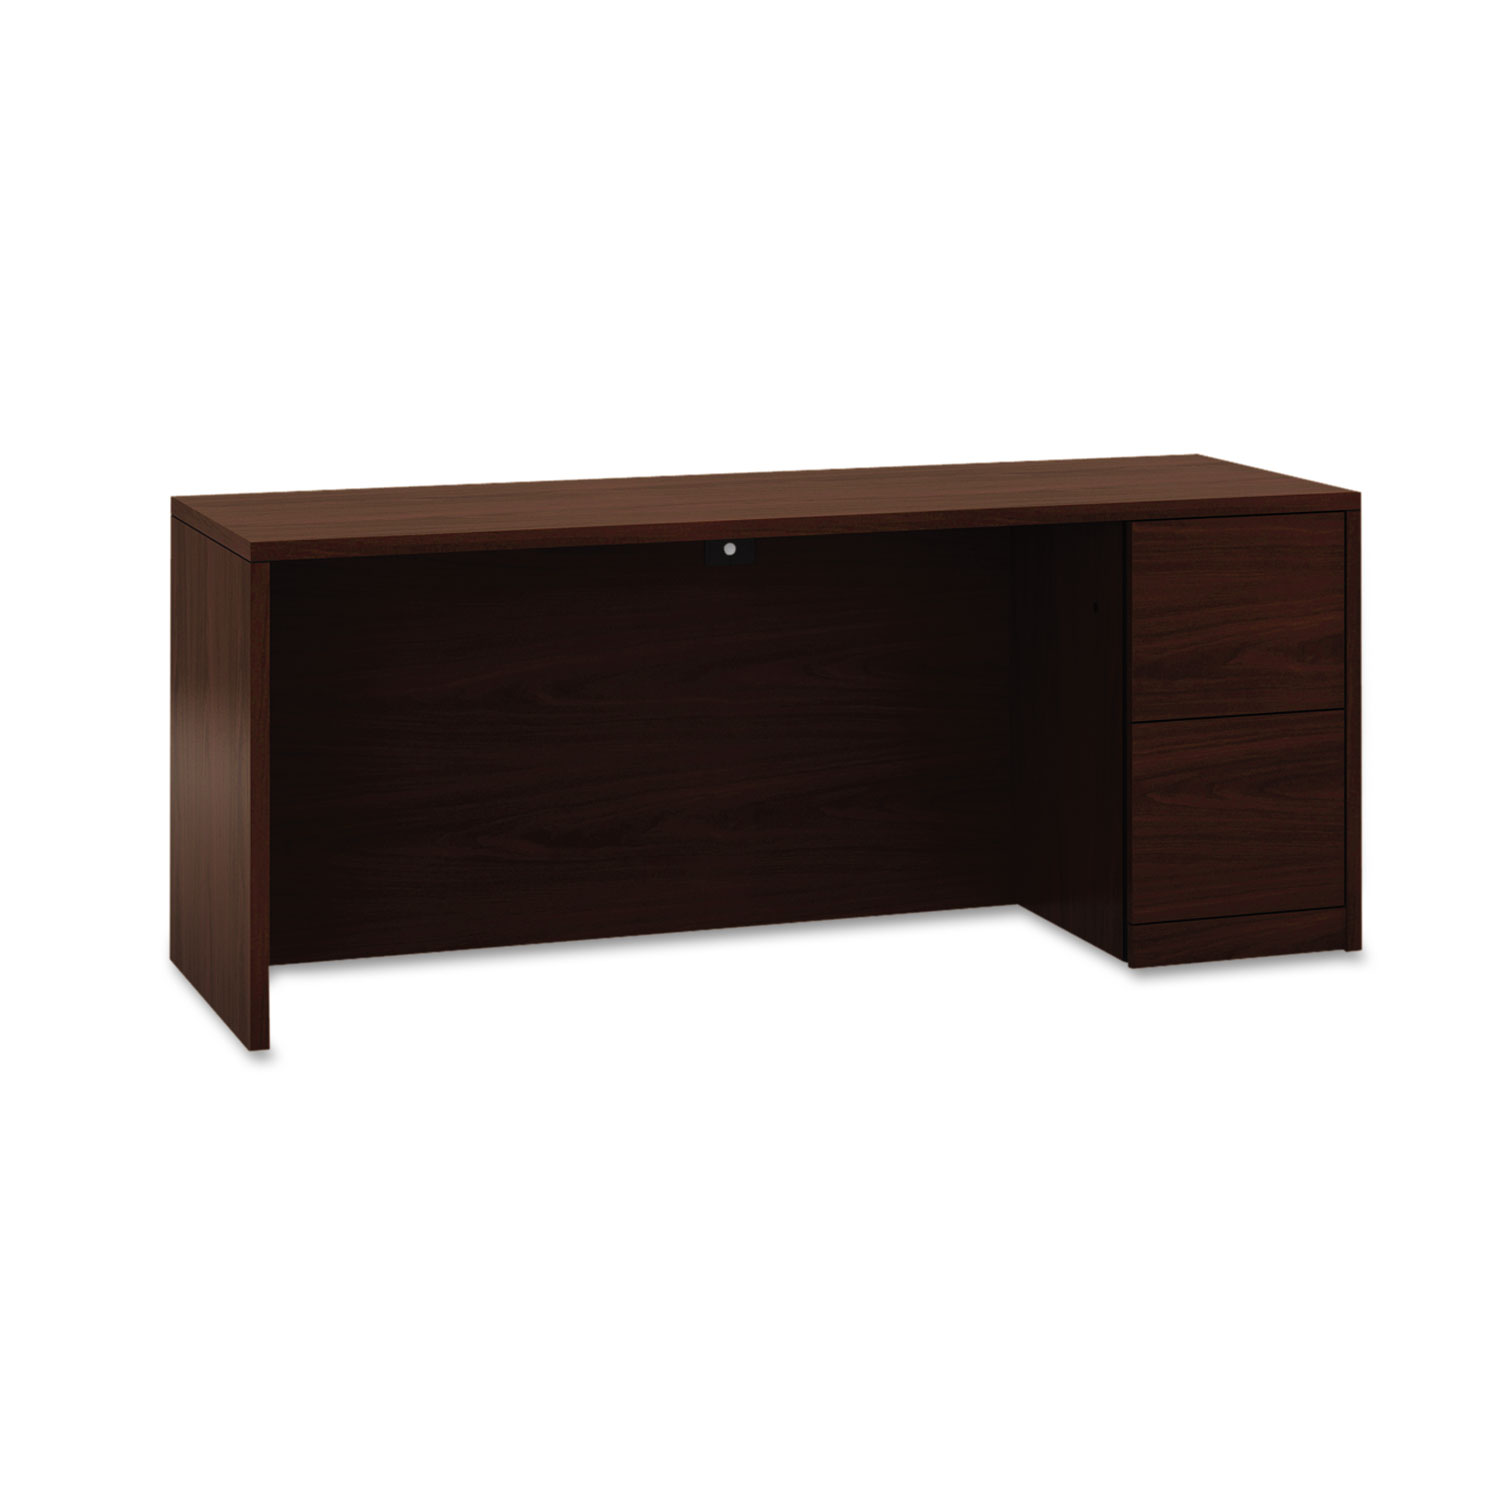 10500 Series Full-Height Left Pedestal Credenza, 72 x 24 x 29-1/2, Natural Maple